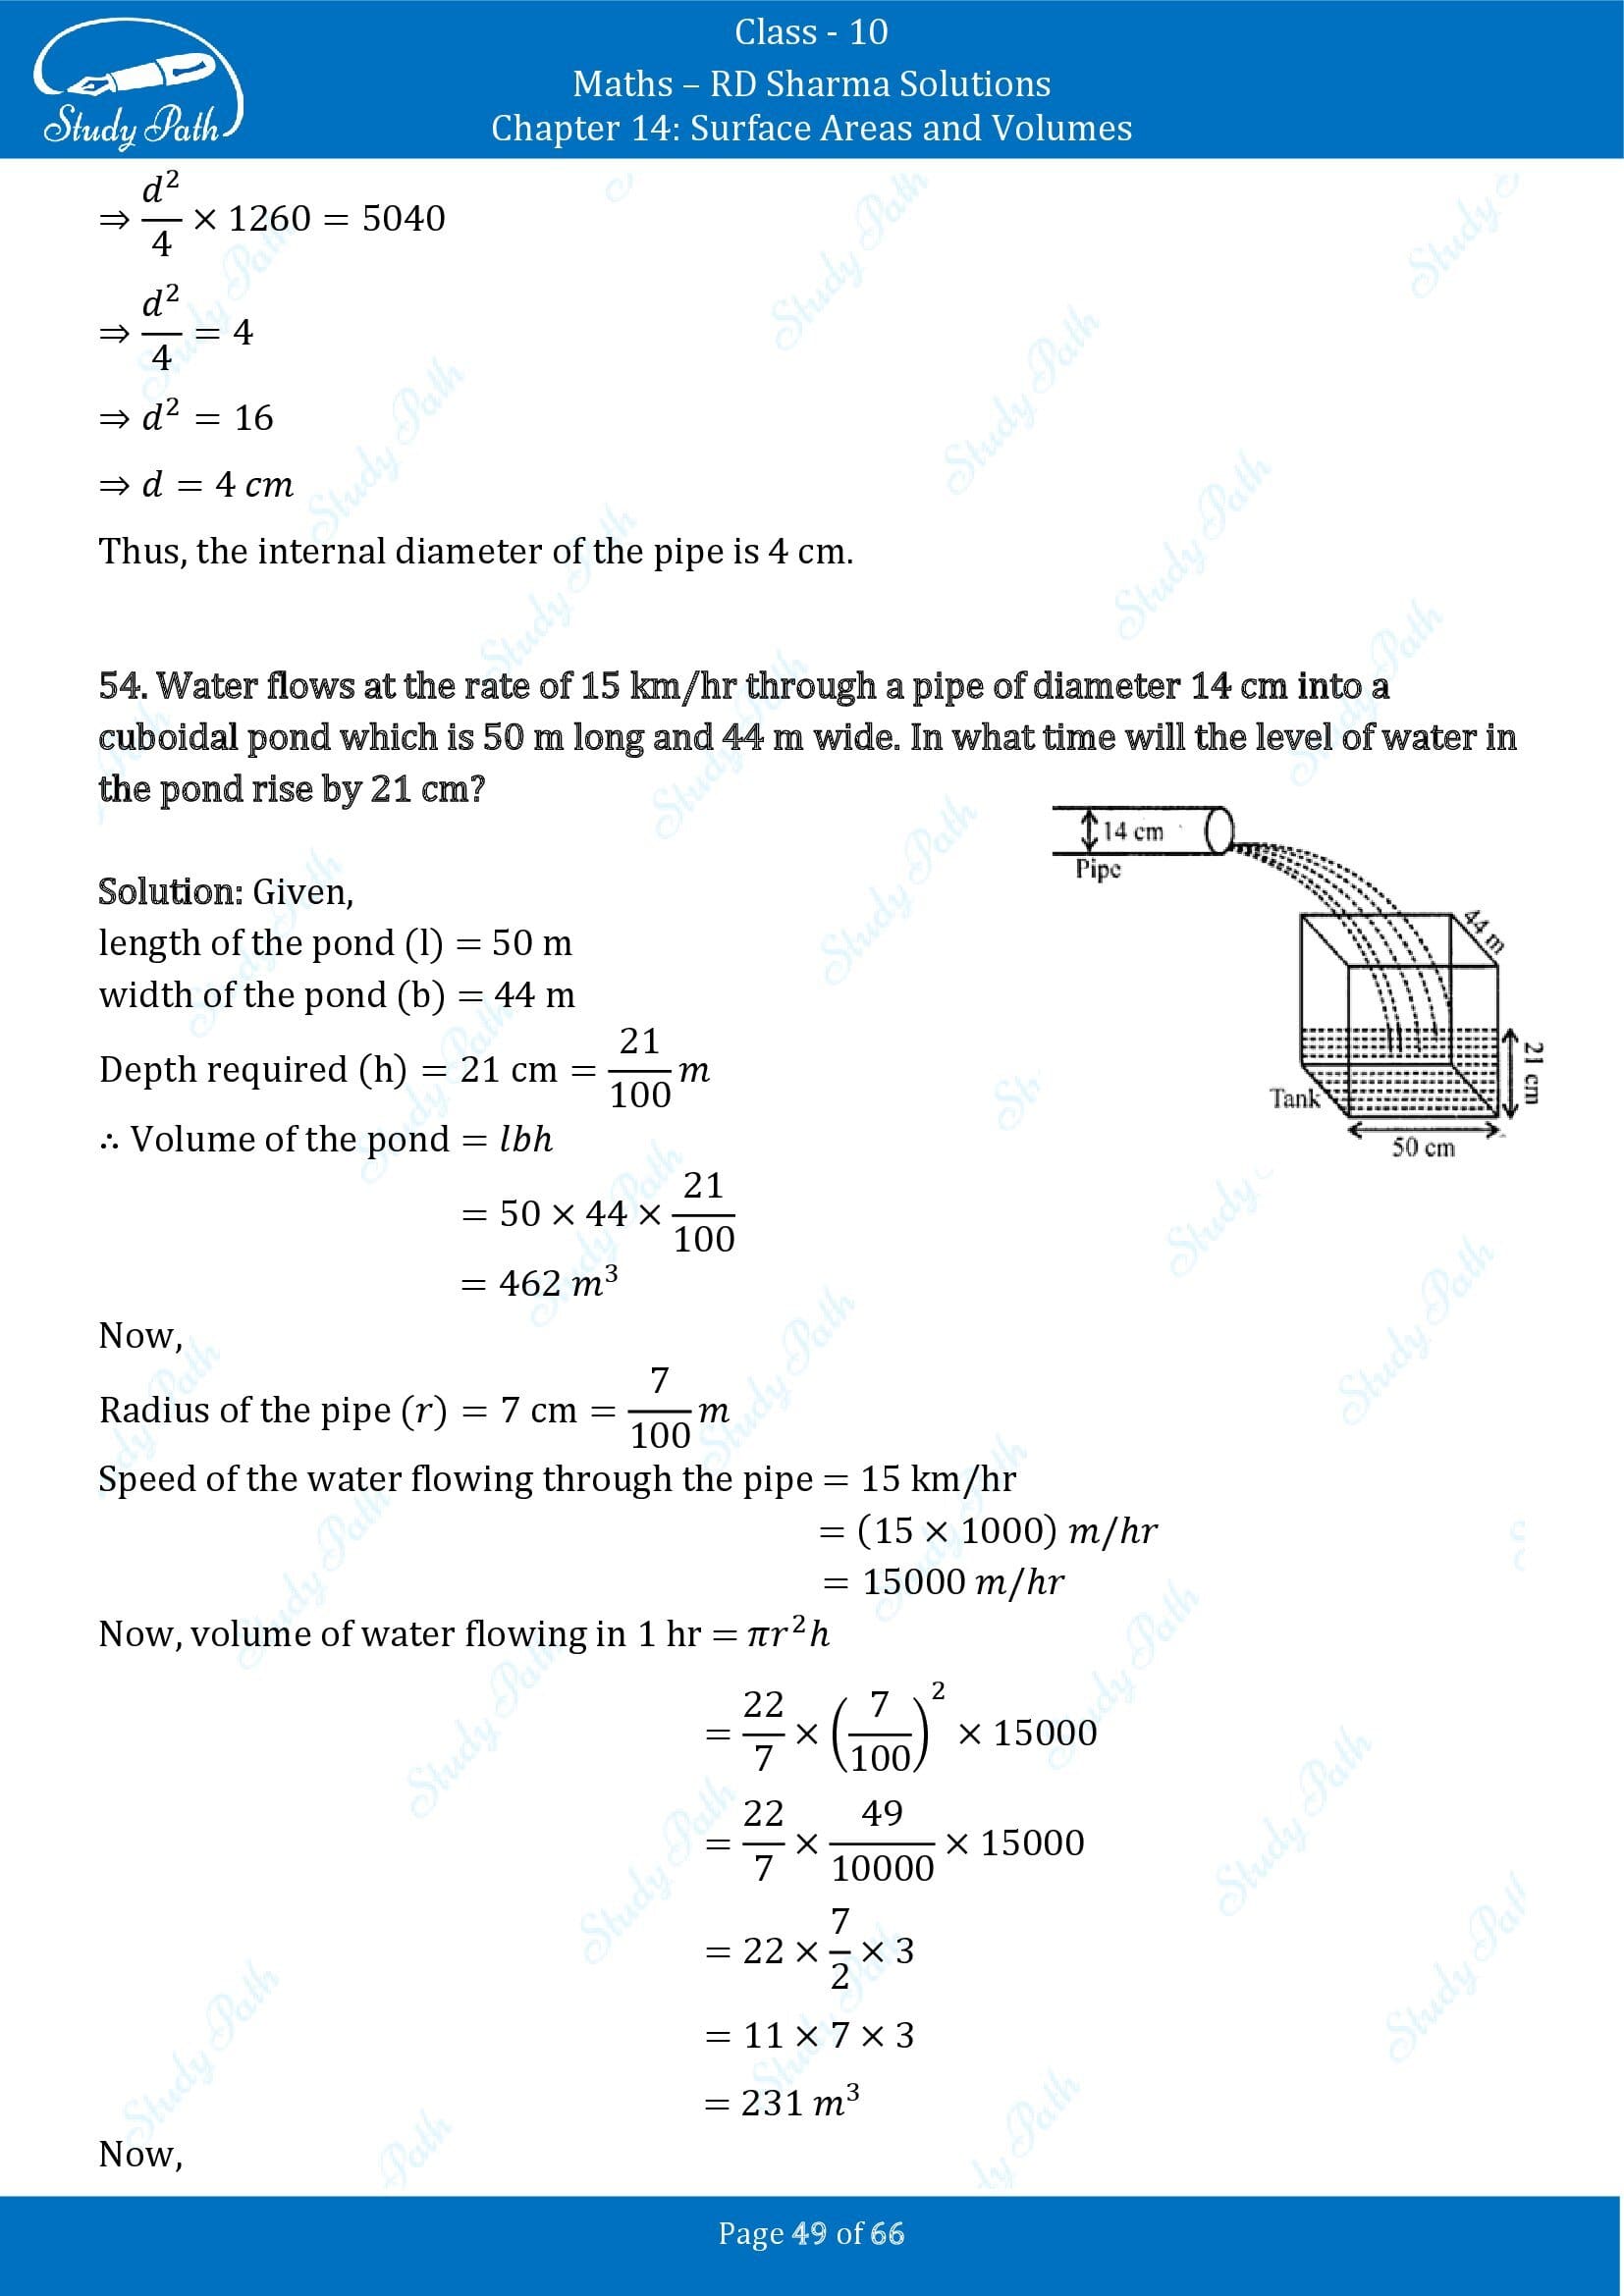 RD Sharma Solutions Class 10 Chapter 14 Surface Areas and Volumes Exercise 14.1 00049